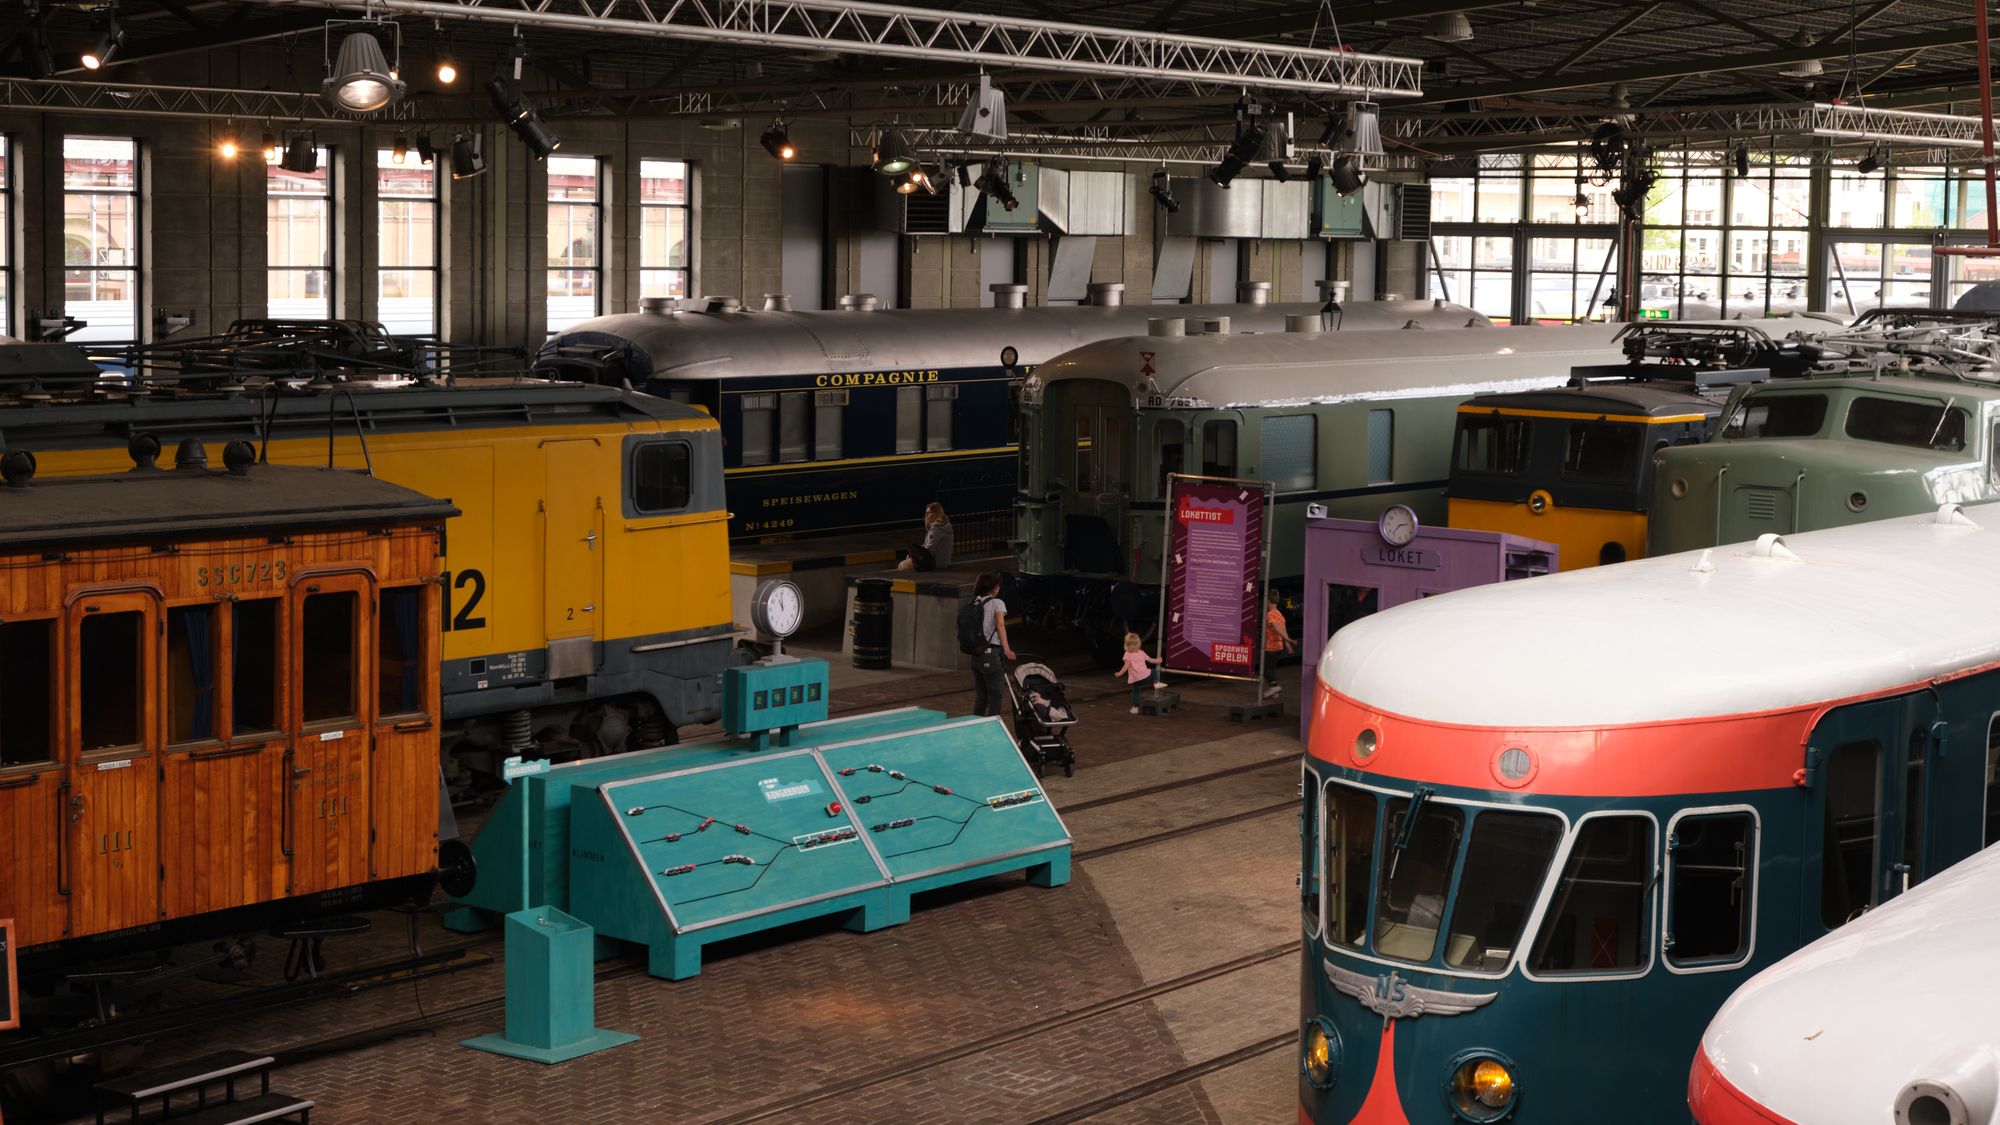 Overview of Some Trains